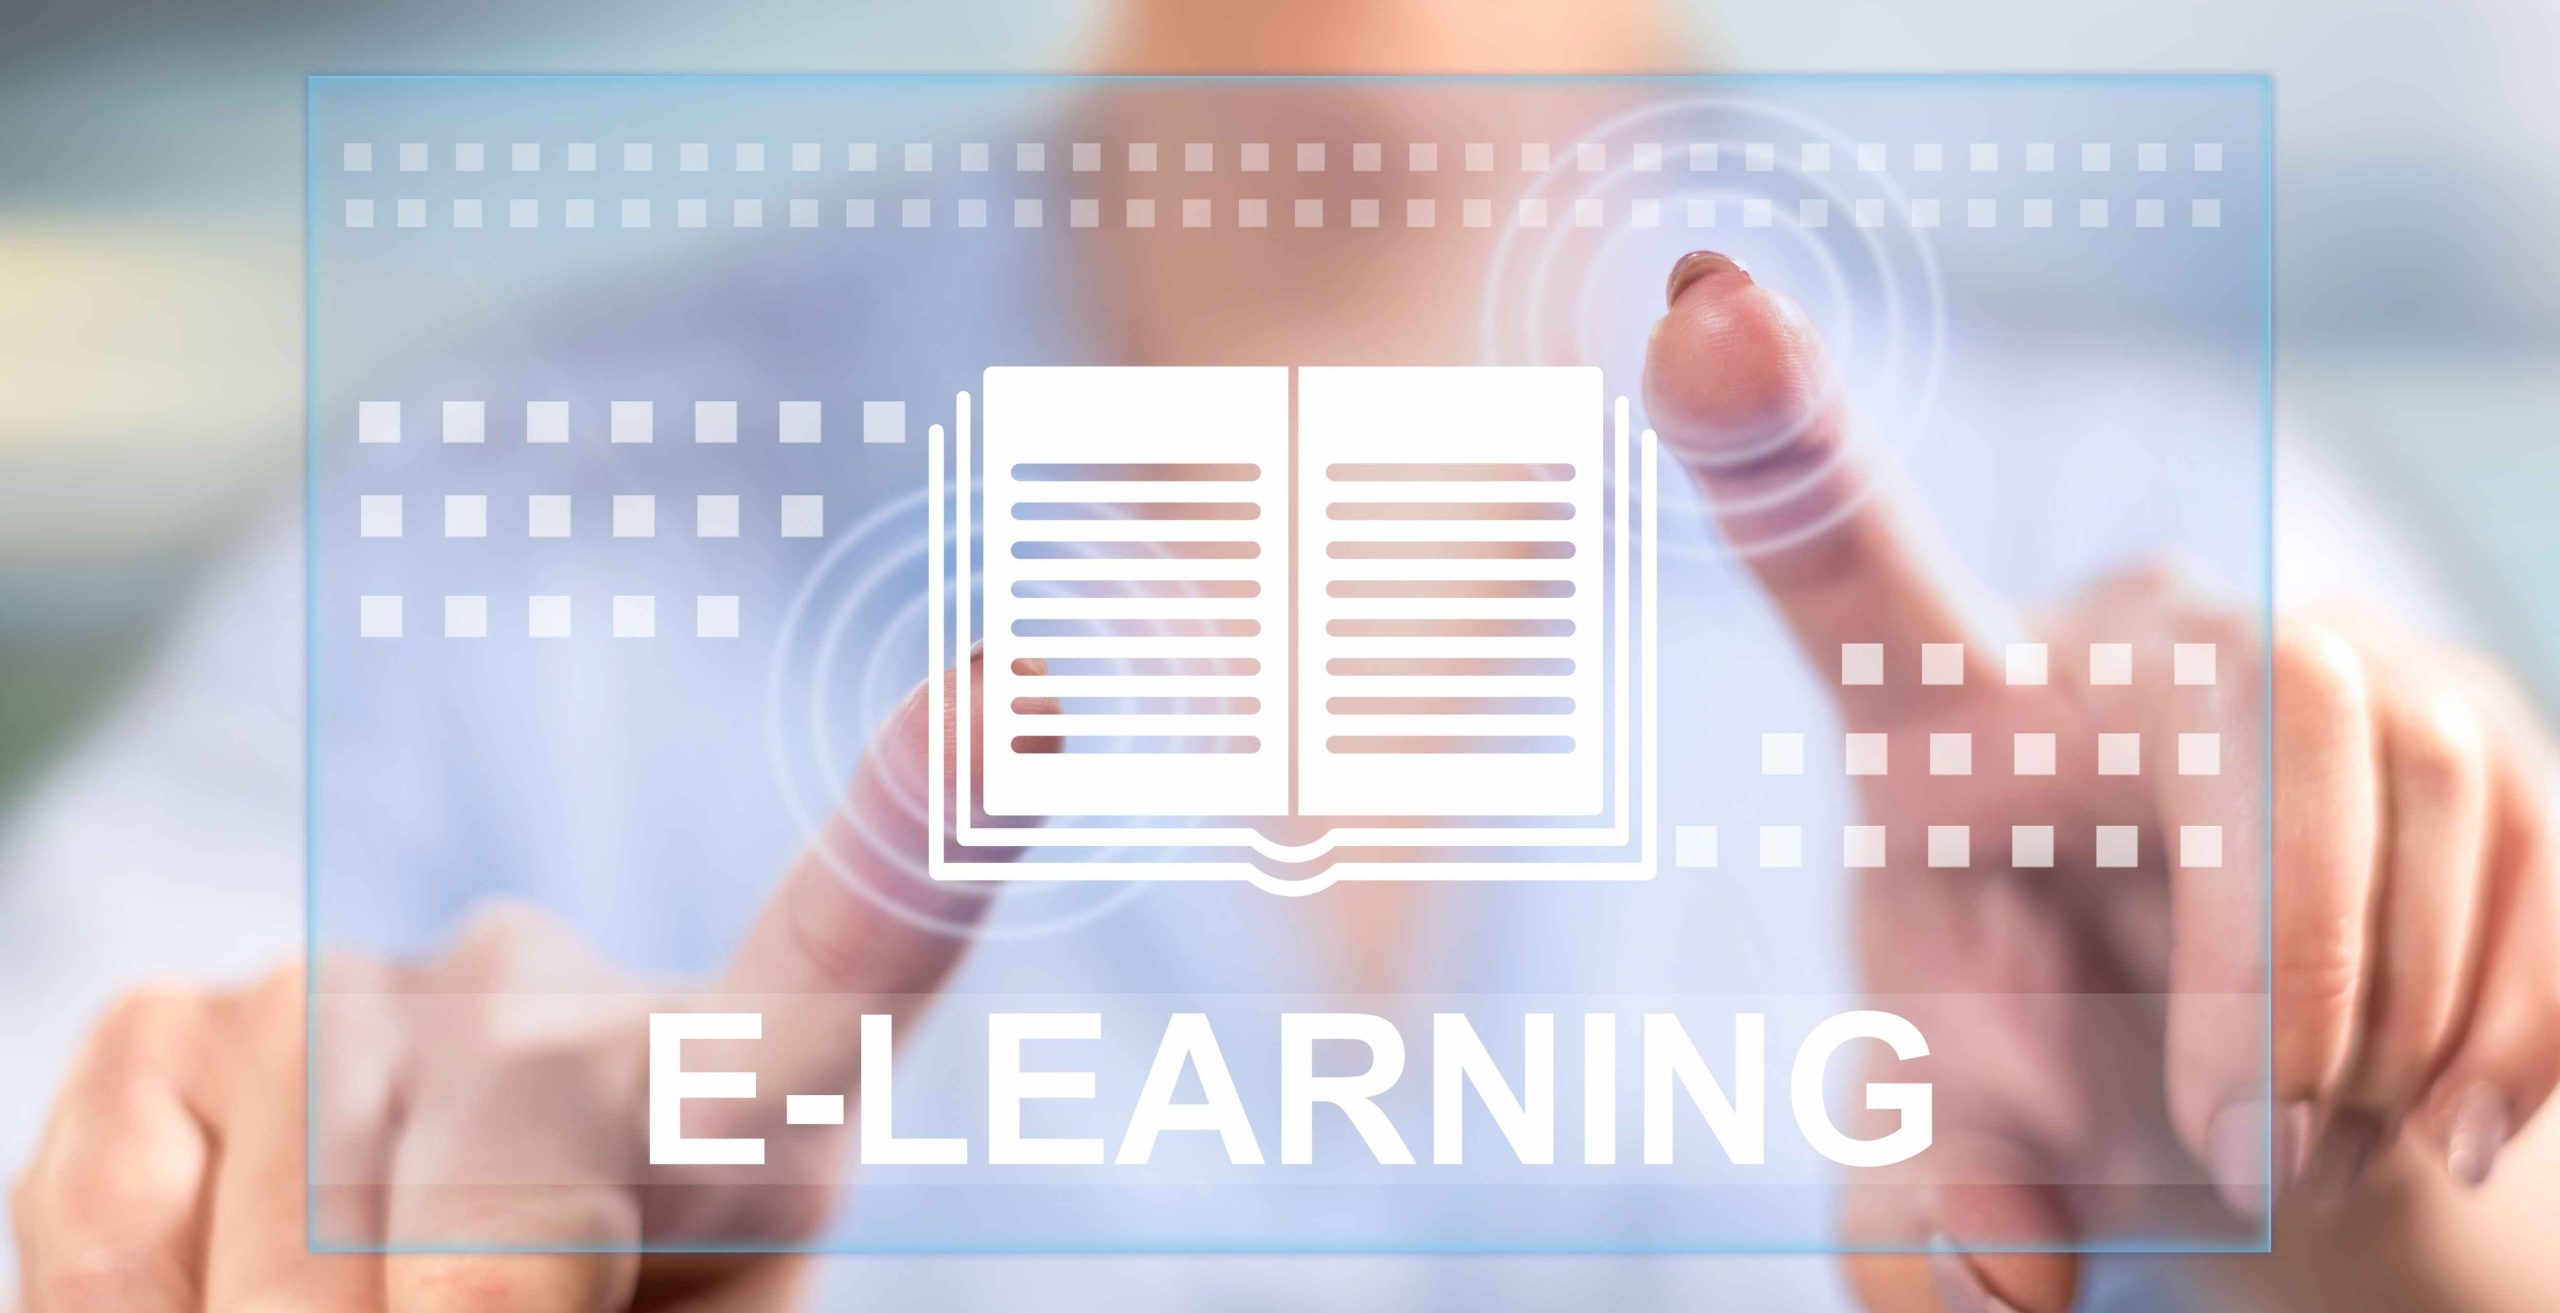 How do you spell elearning? From E-learning to Learning Technologies